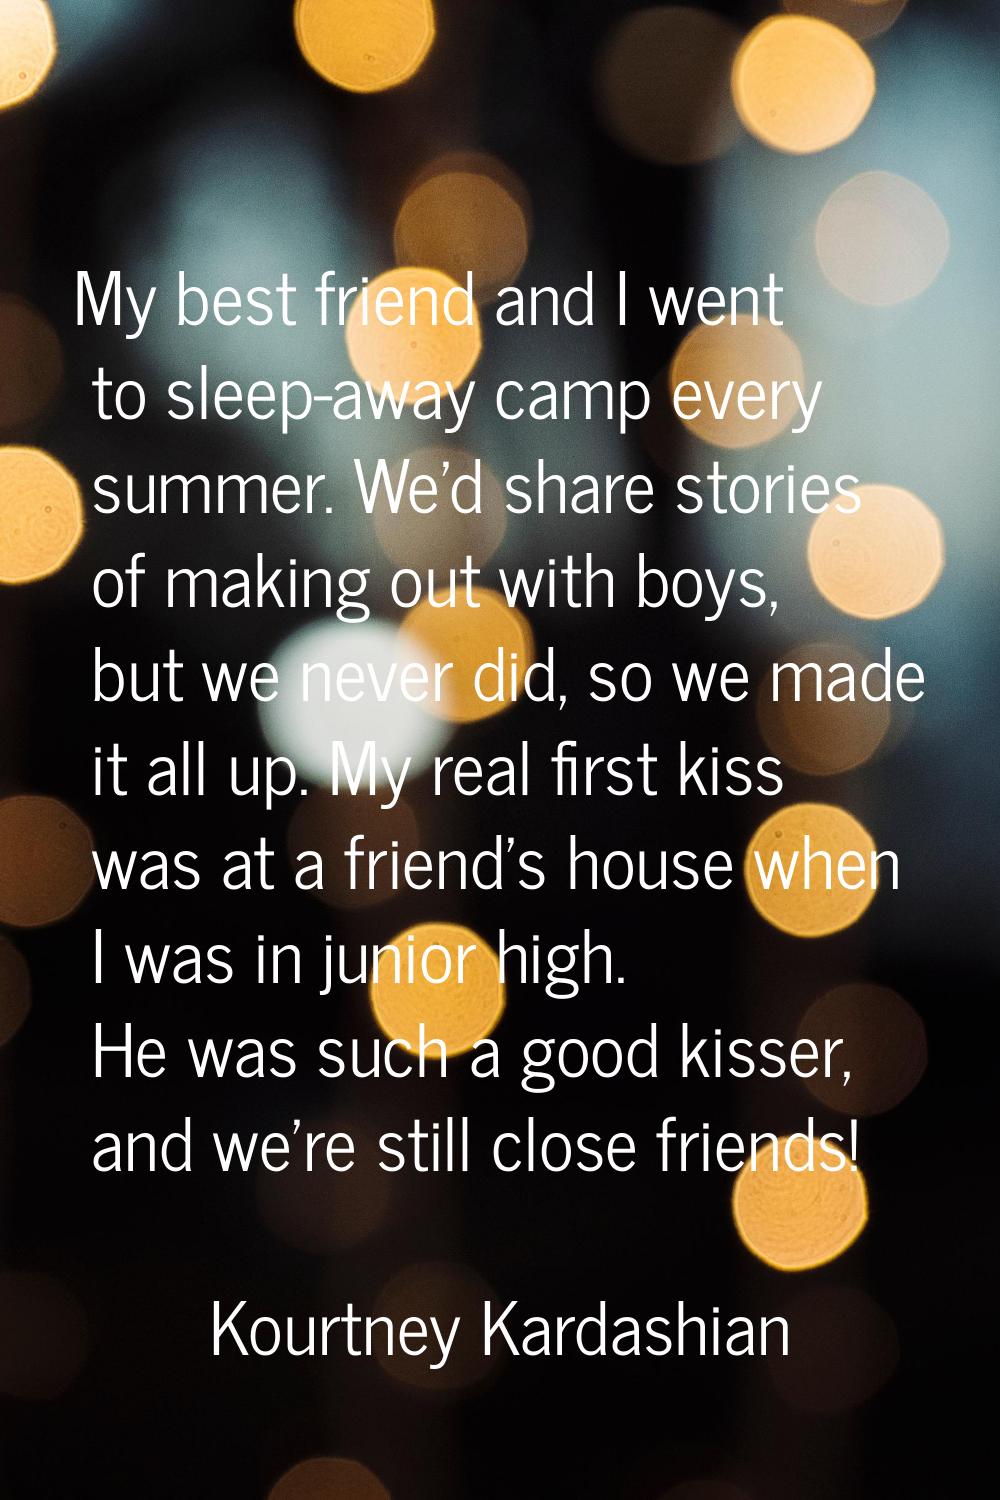 My best friend and I went to sleep-away camp every summer. We'd share stories of making out with bo